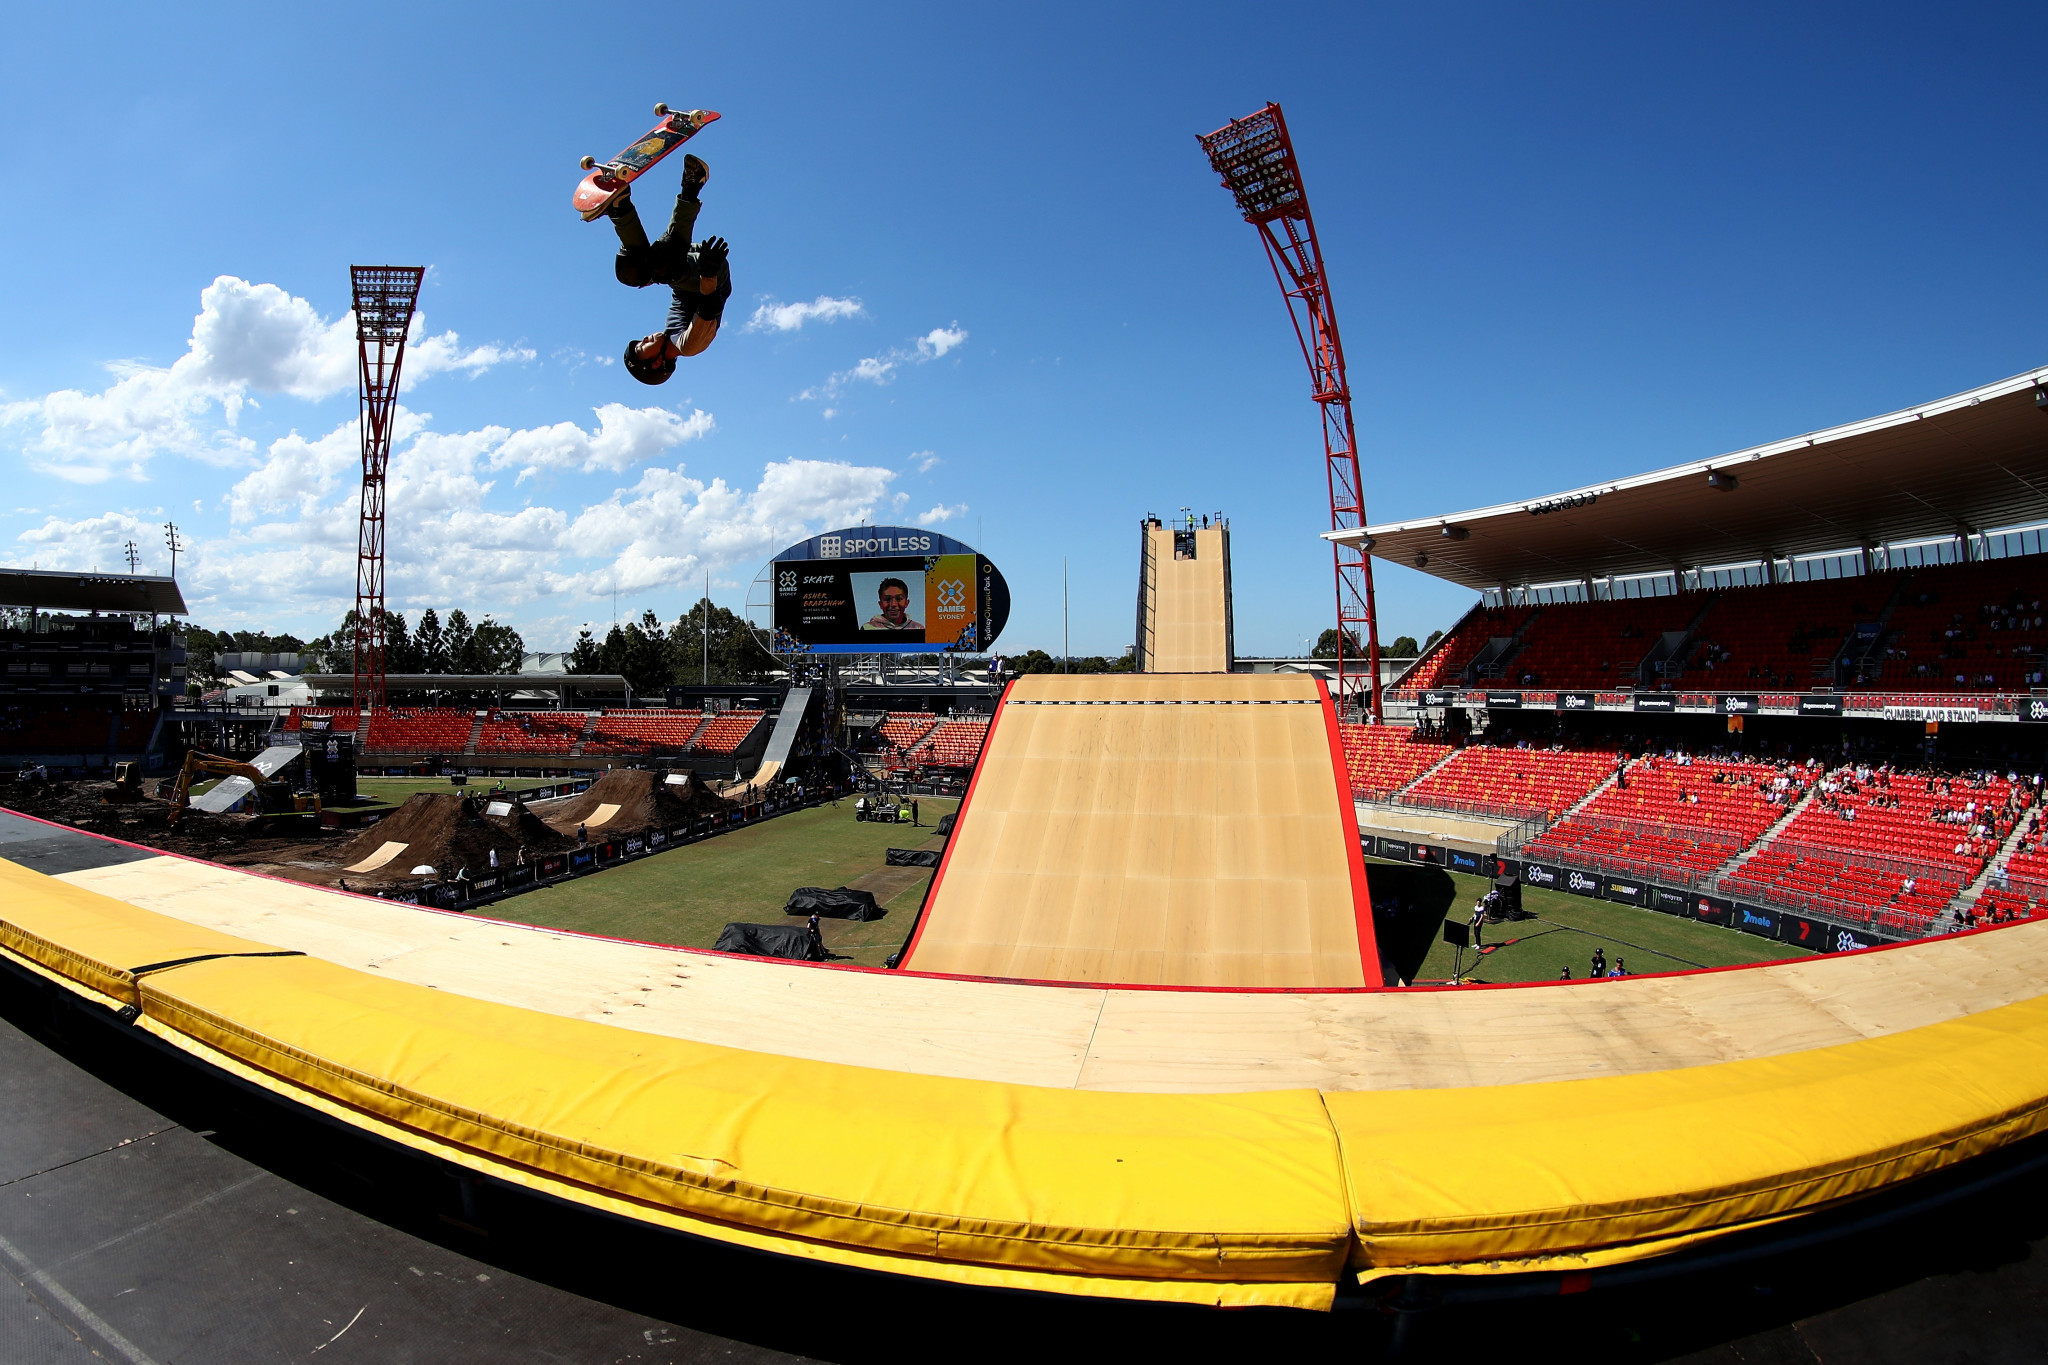 Australia hosted an X Games event for the first time in October at the Sydney Olympic Park ©Getty Images